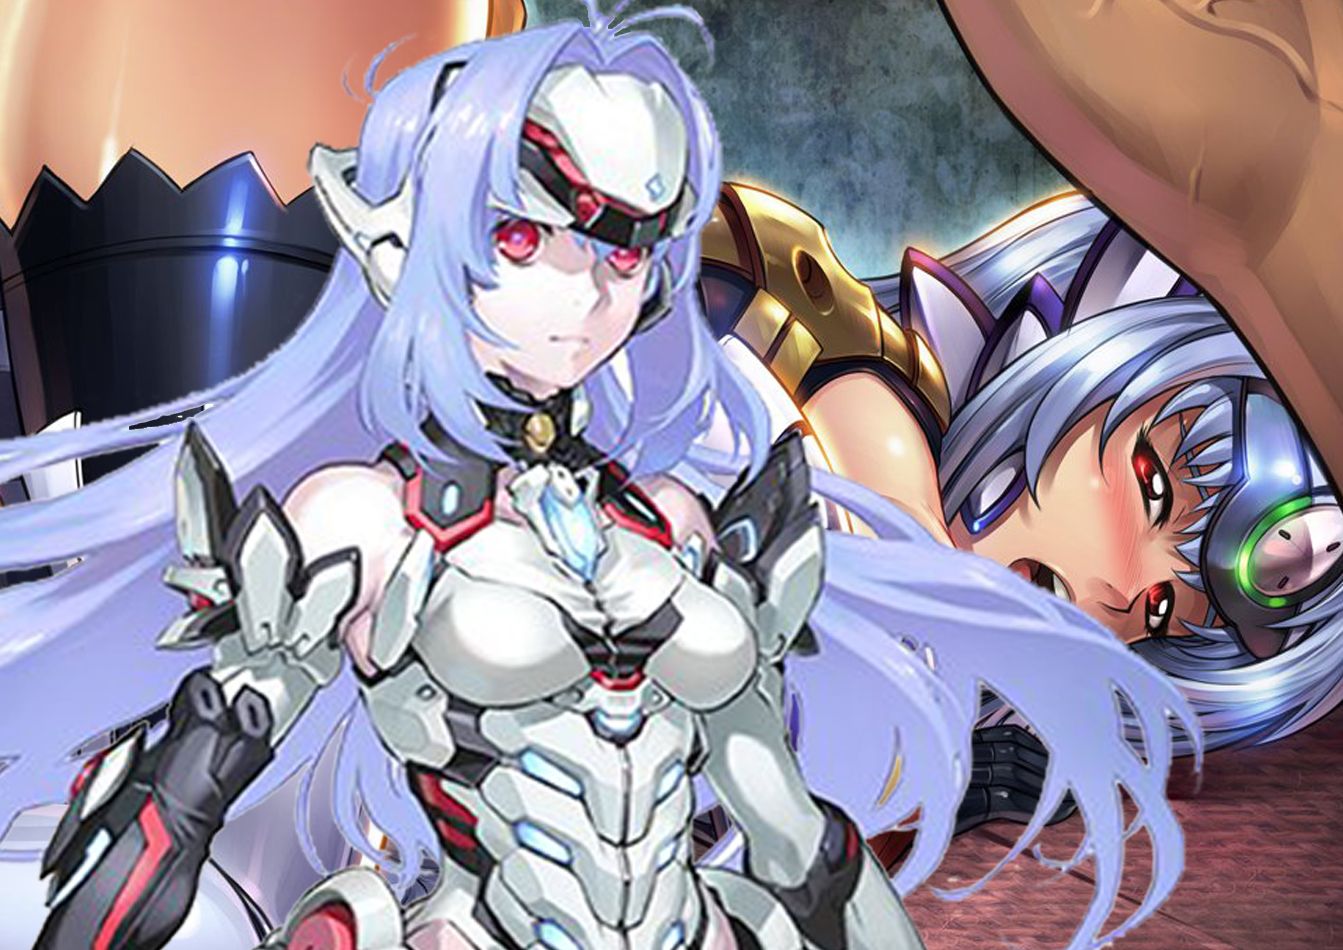 Xenoblade Chronicles 2 Will Have Special Guest Appearance By A Robot With Plasma Cannon Tiddies